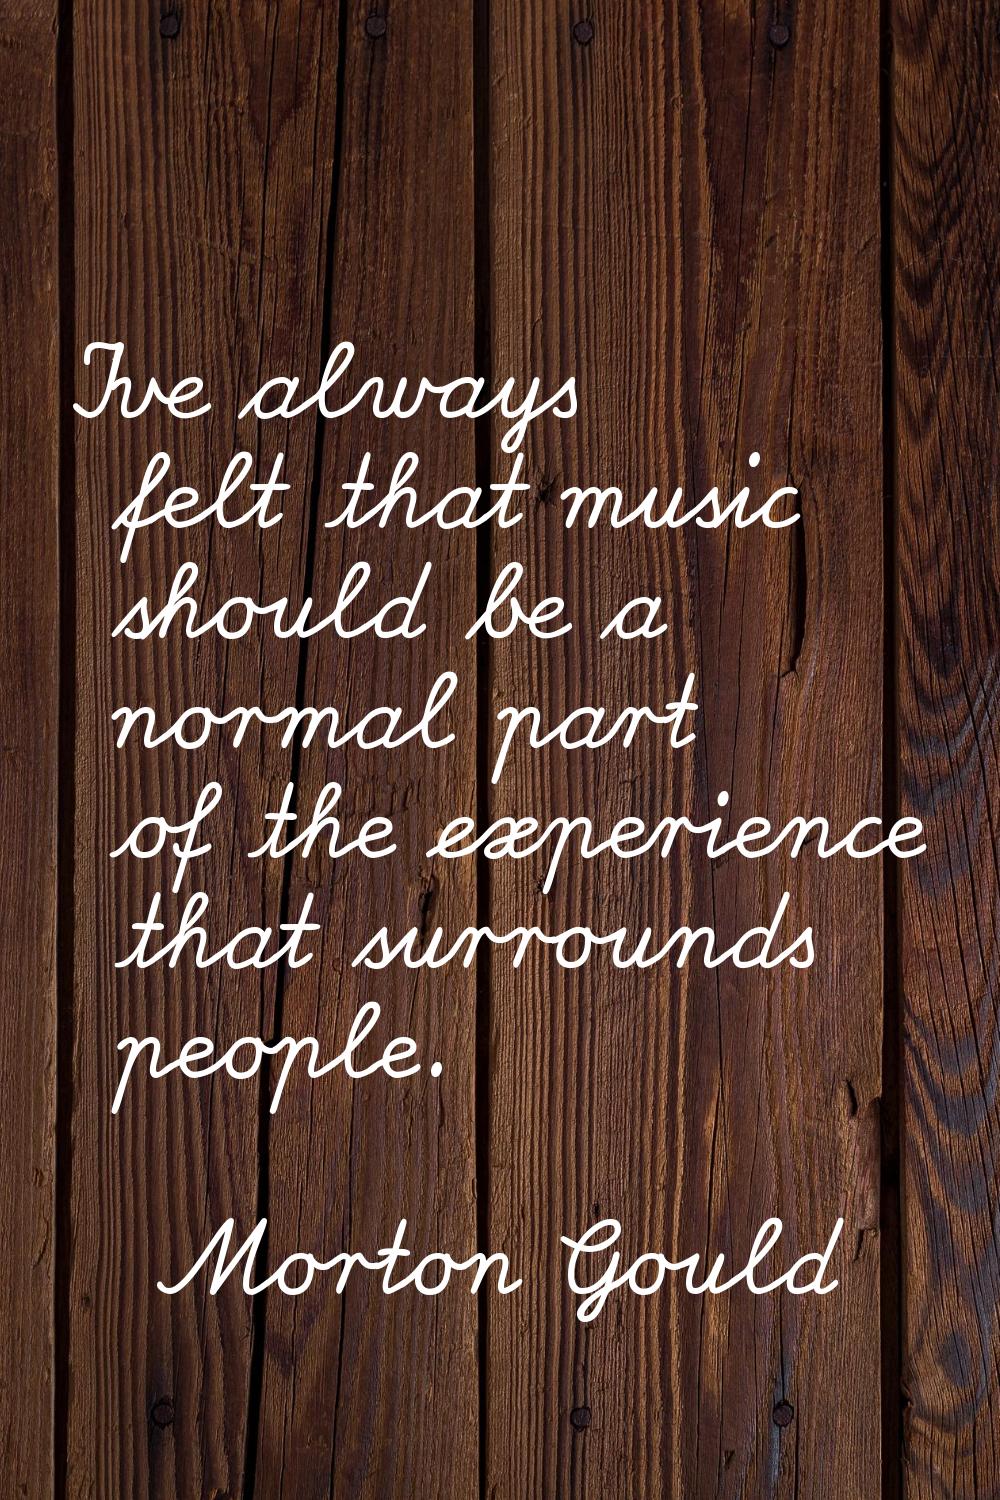 I've always felt that music should be a normal part of the experience that surrounds people.